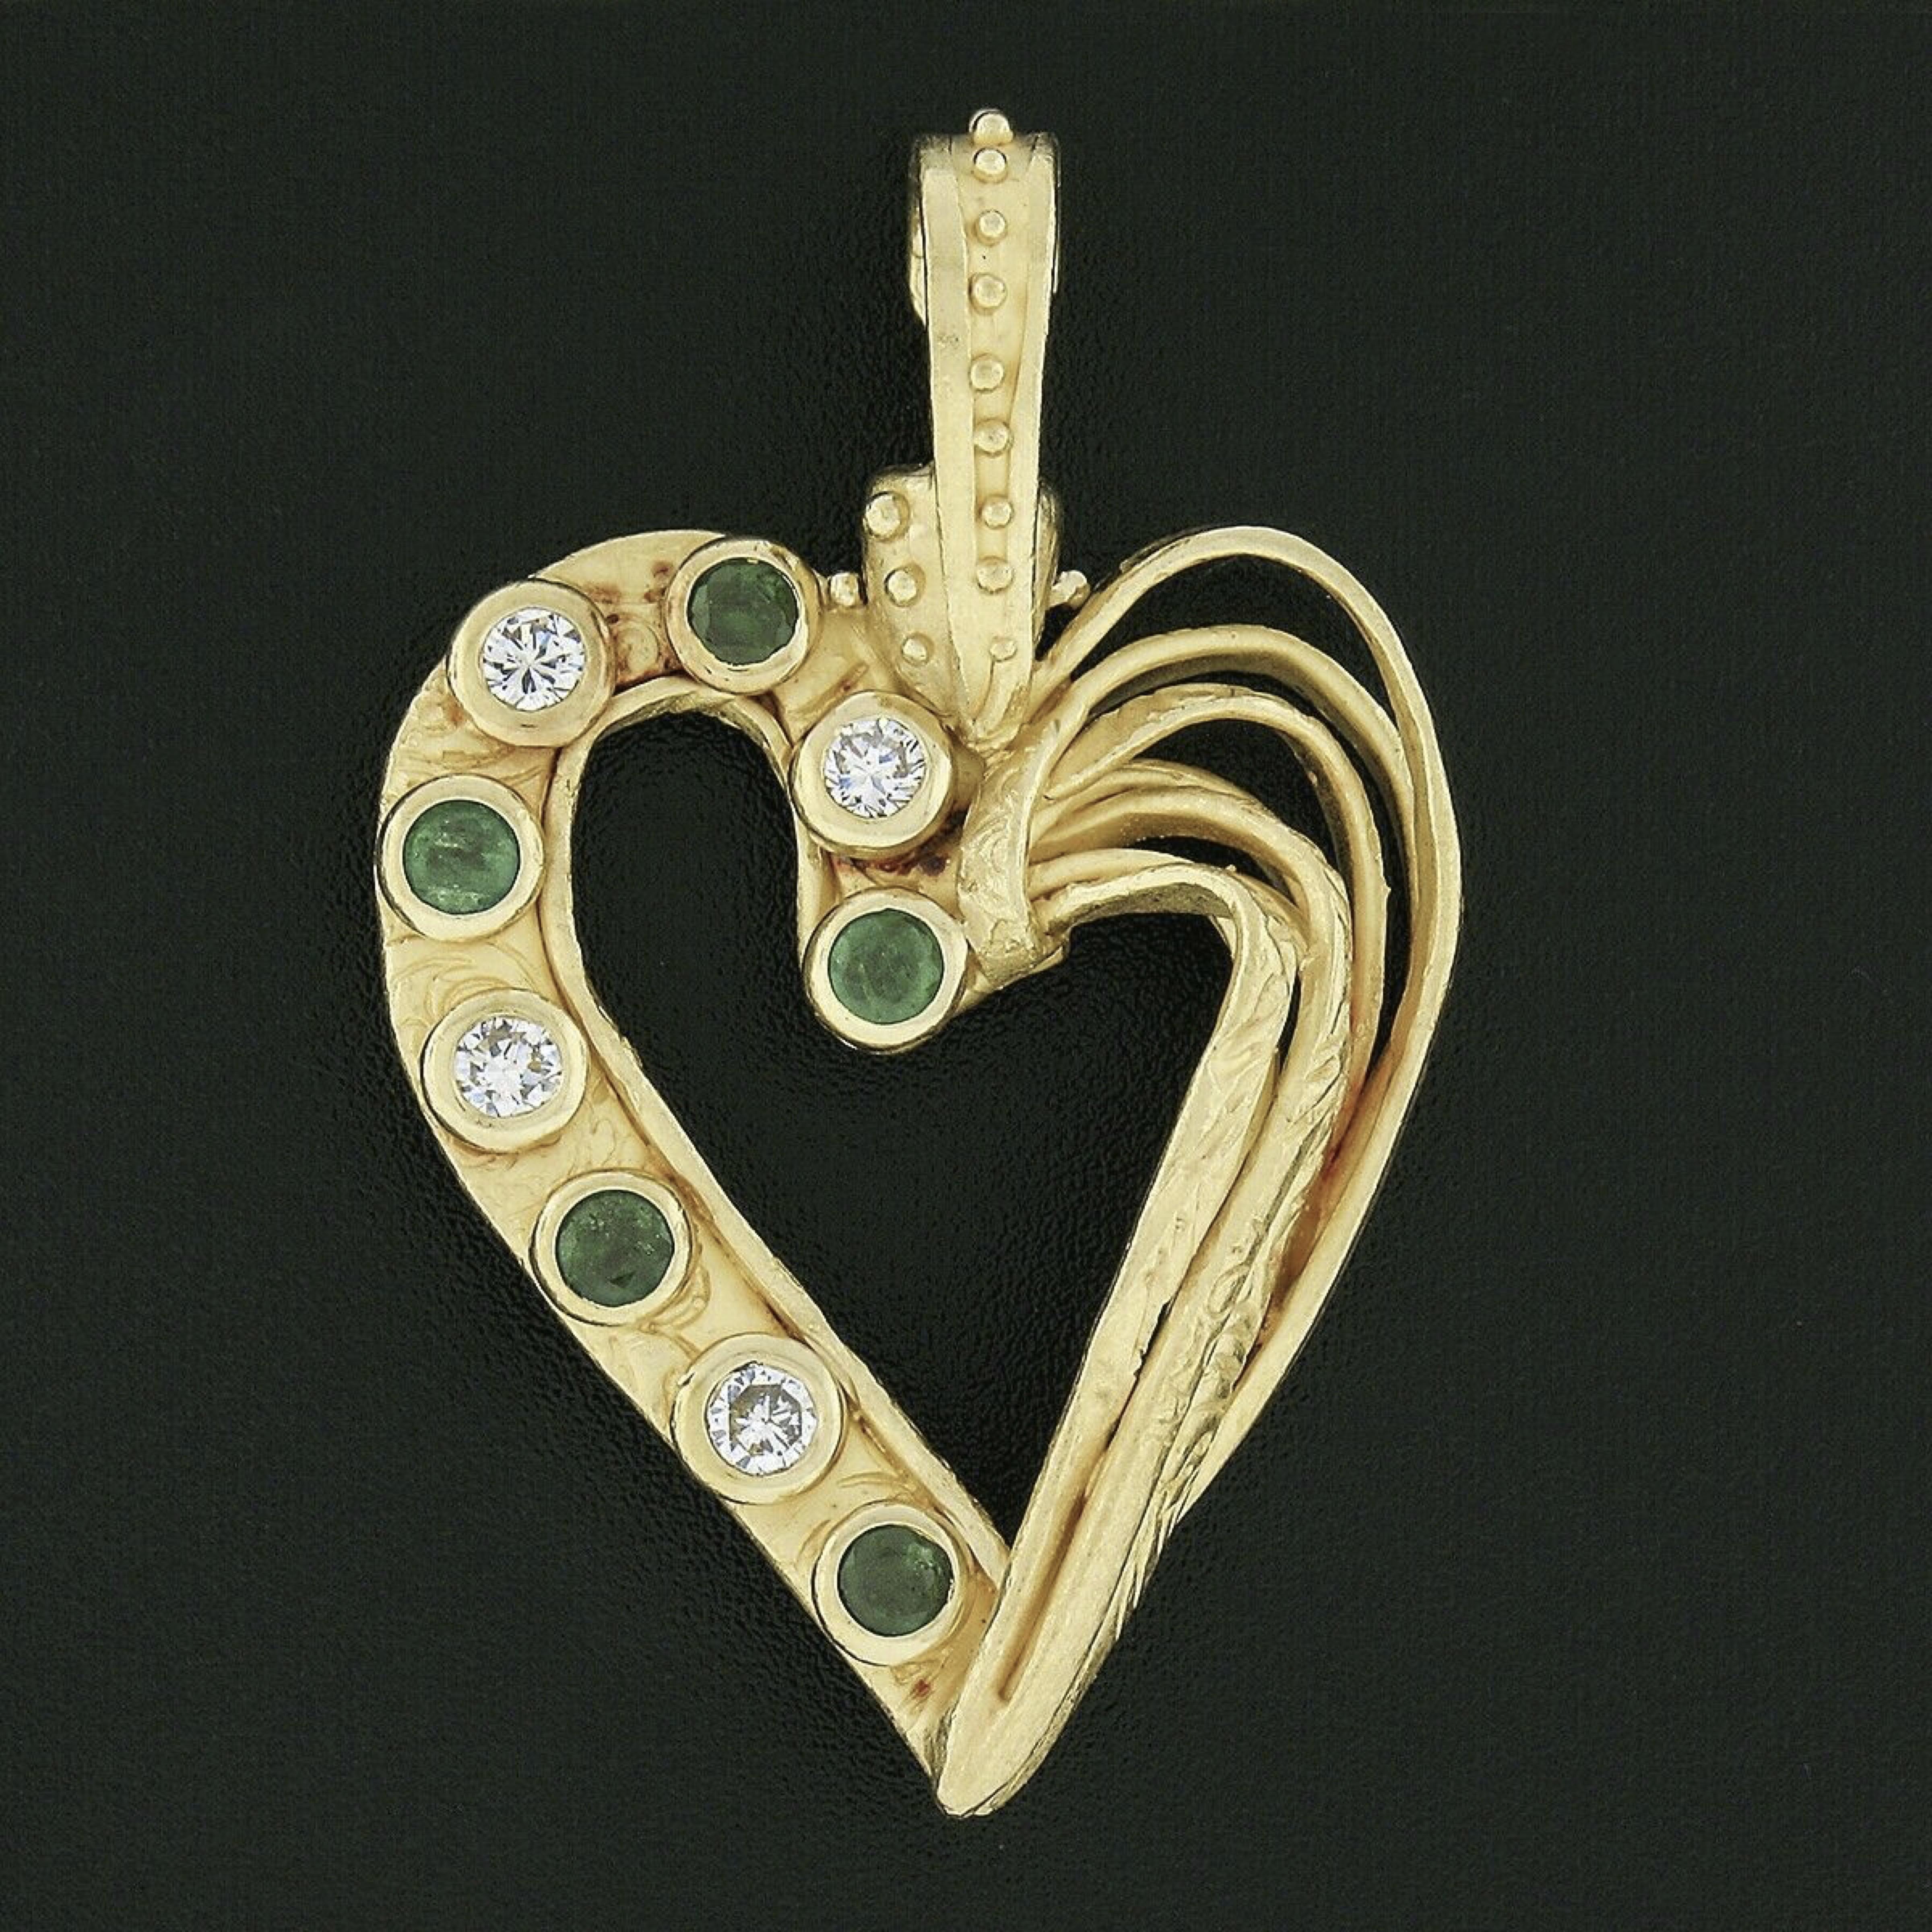 Here we have a magnificent open heart statement pendant designed by Denise Roberge that is crafted in solid 22k yellow gold. This large pendant features approximately 1.08 carats of fine quality emeralds and diamonds that are neatly bezel set at one